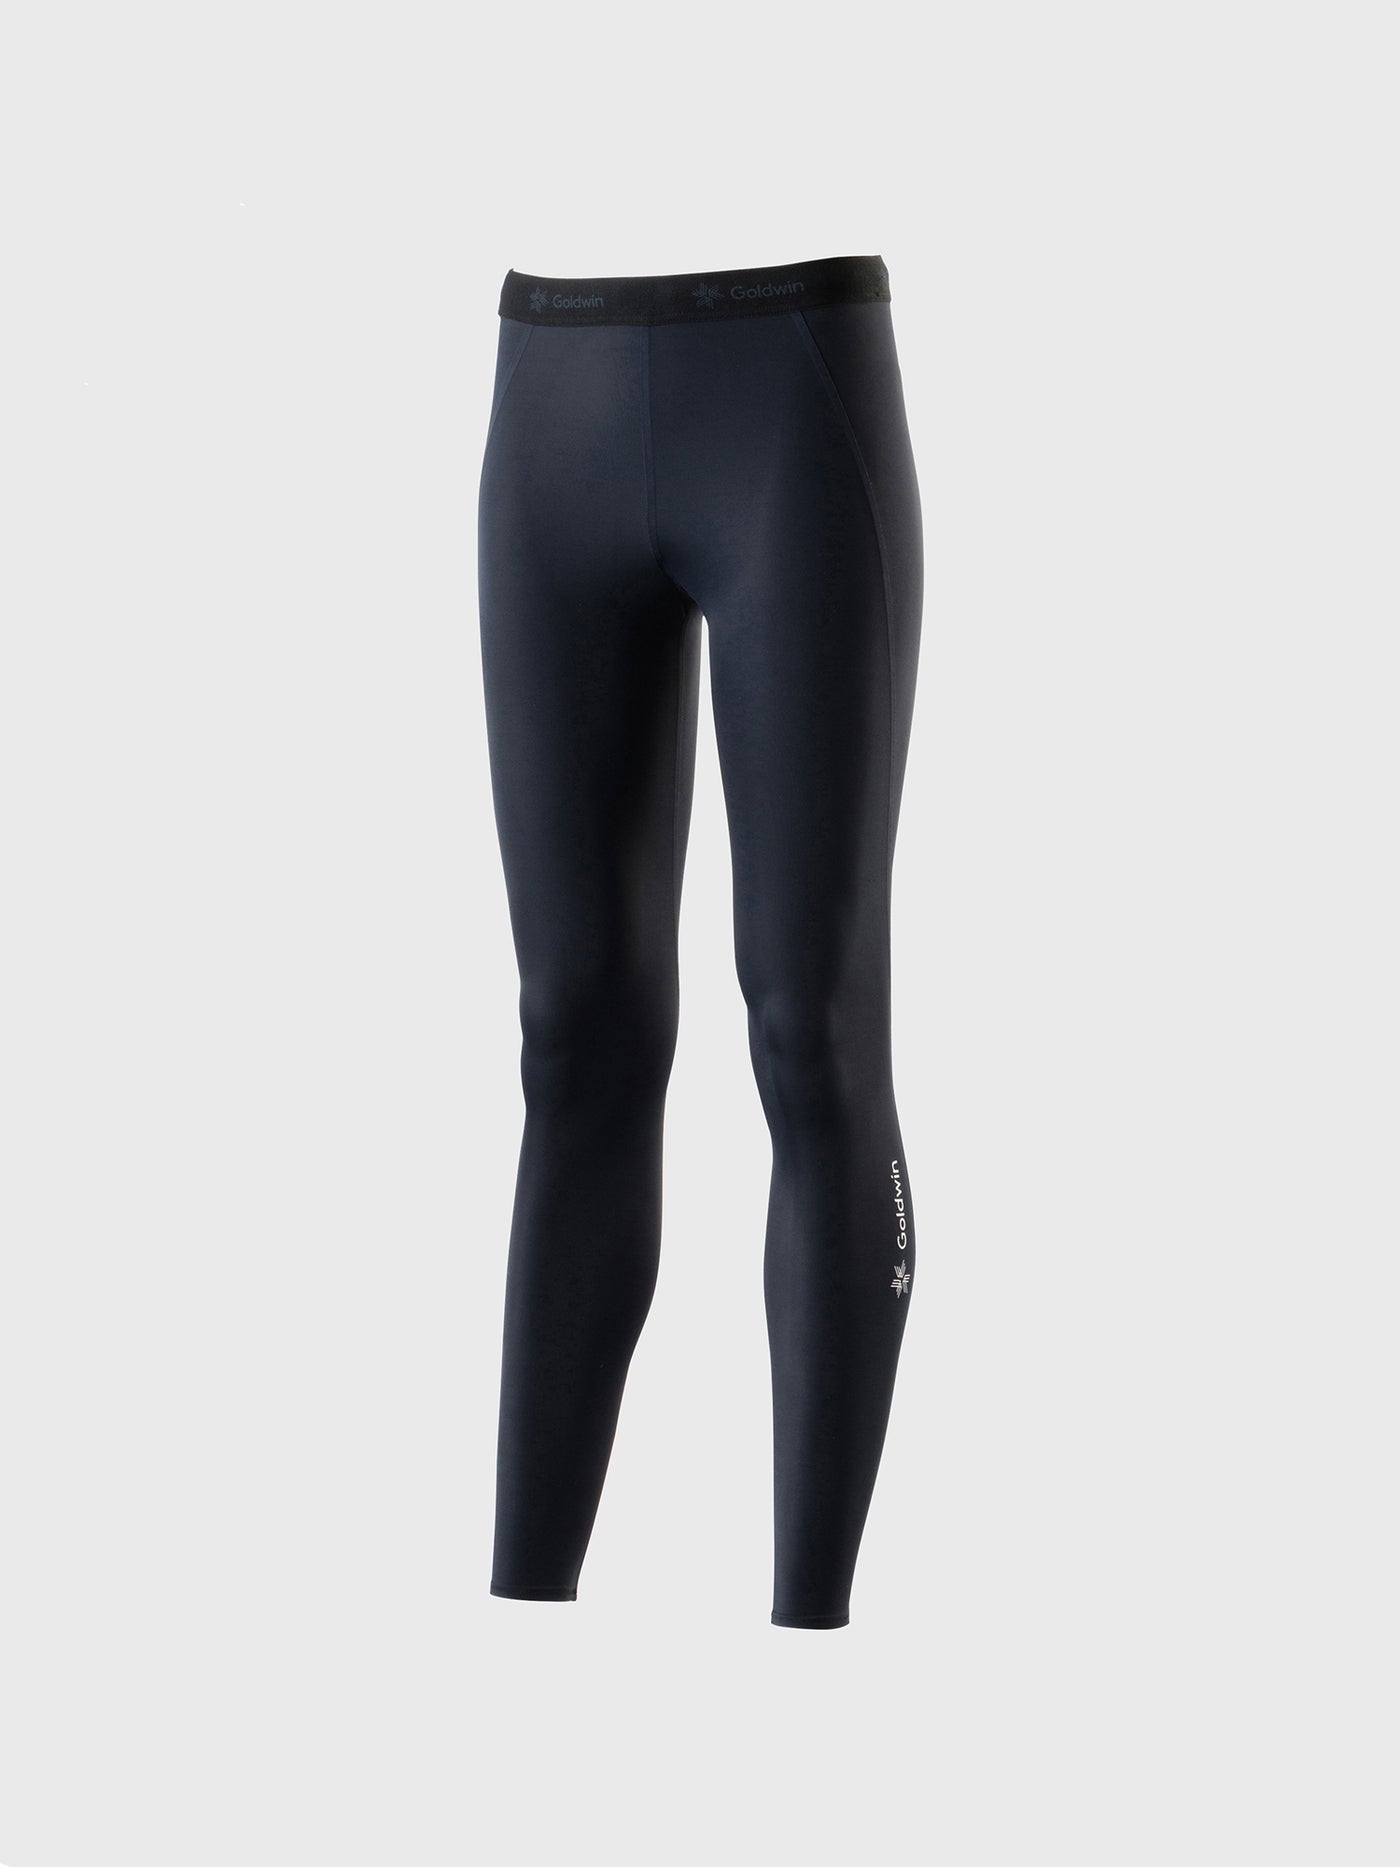 Compression Long Tights (Woman)